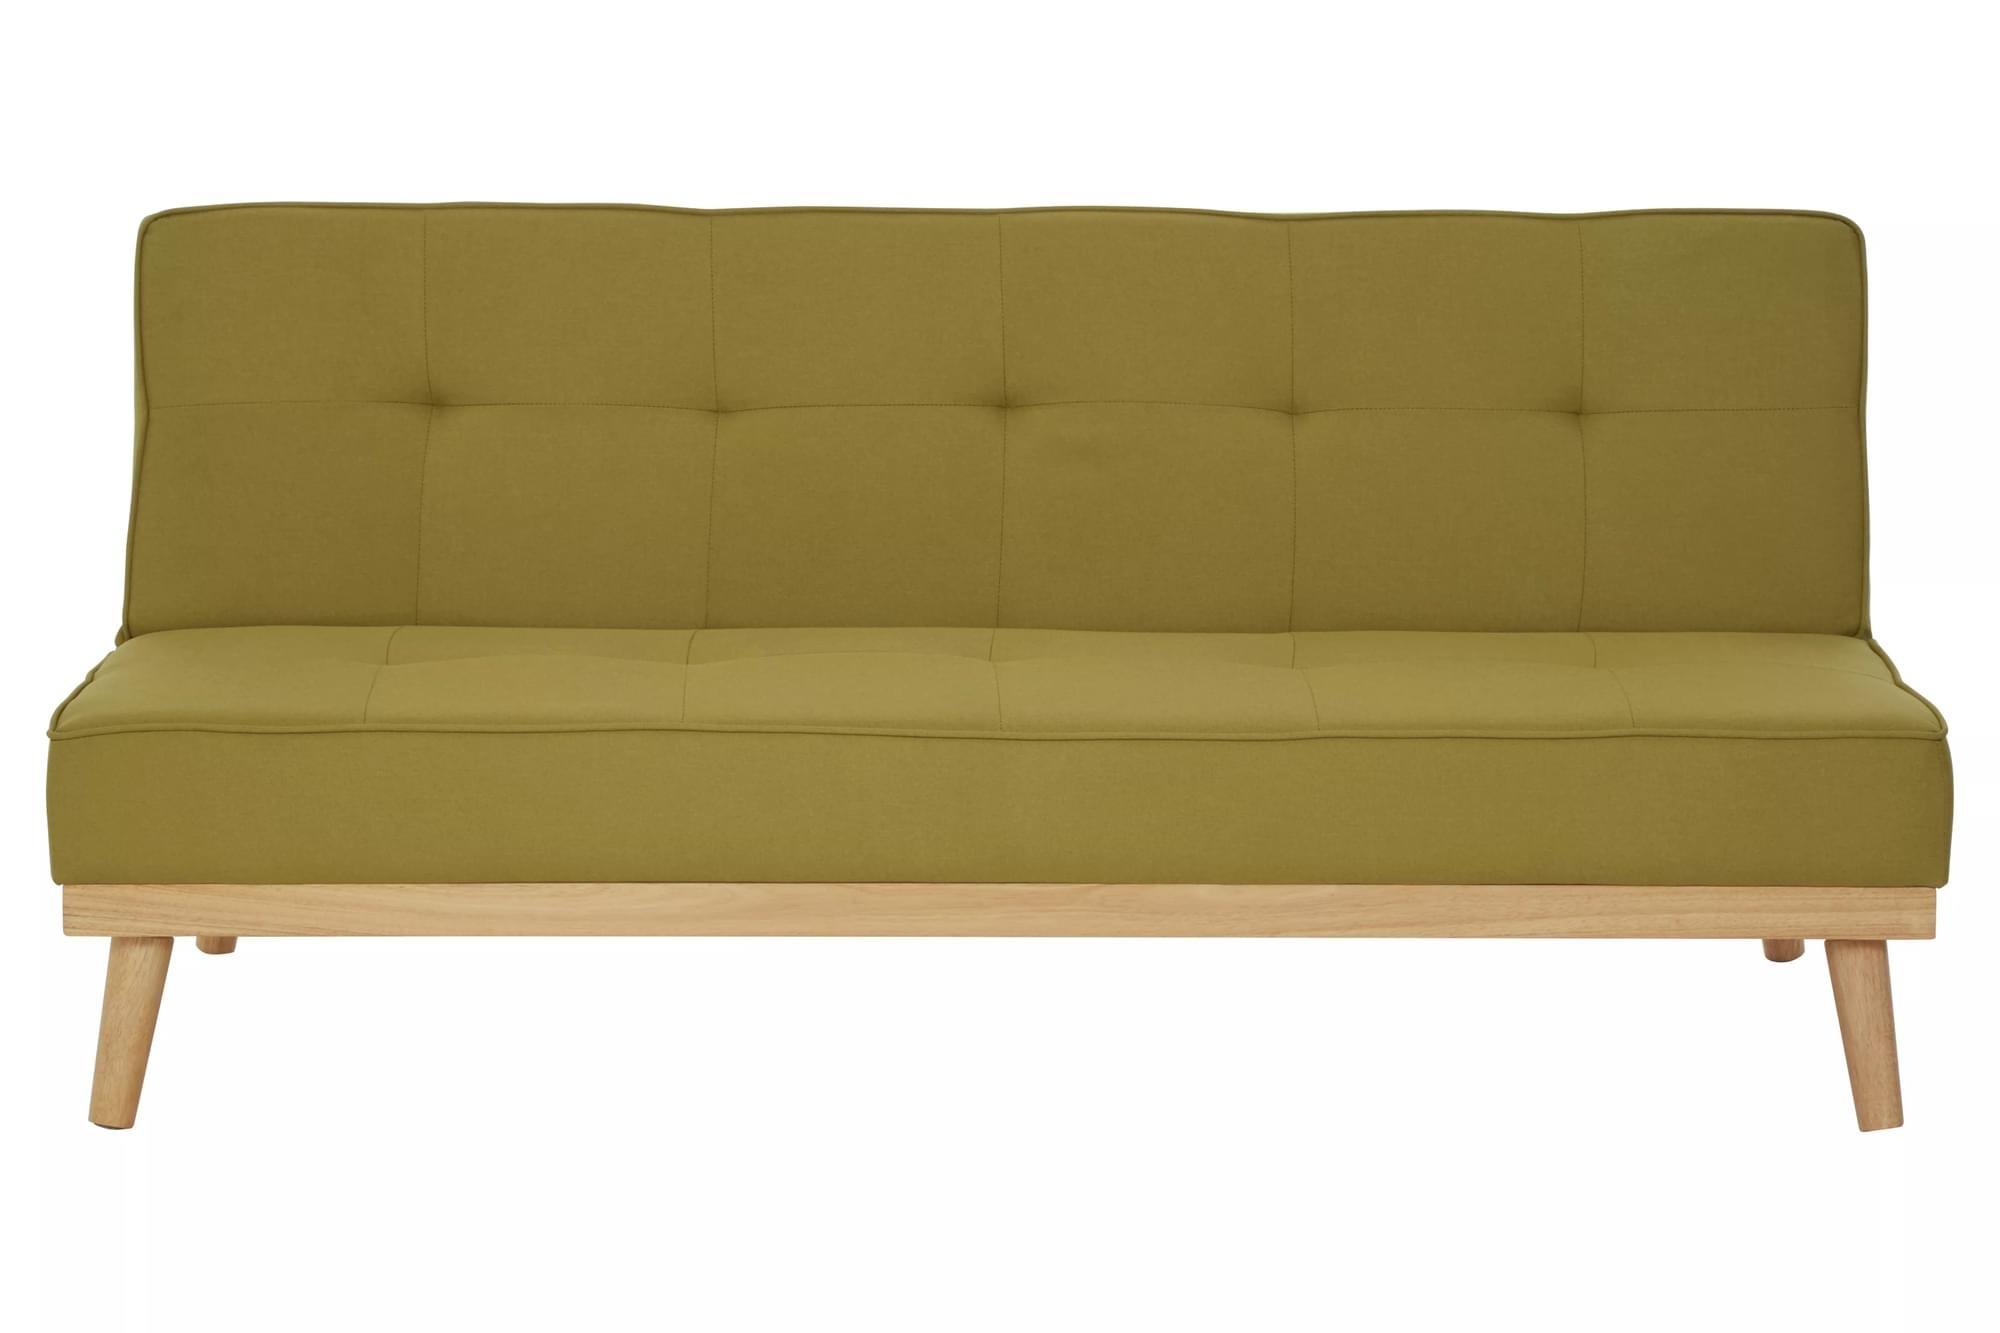 Interiors by Premier Stockholm 3 Seat Sofa Bed